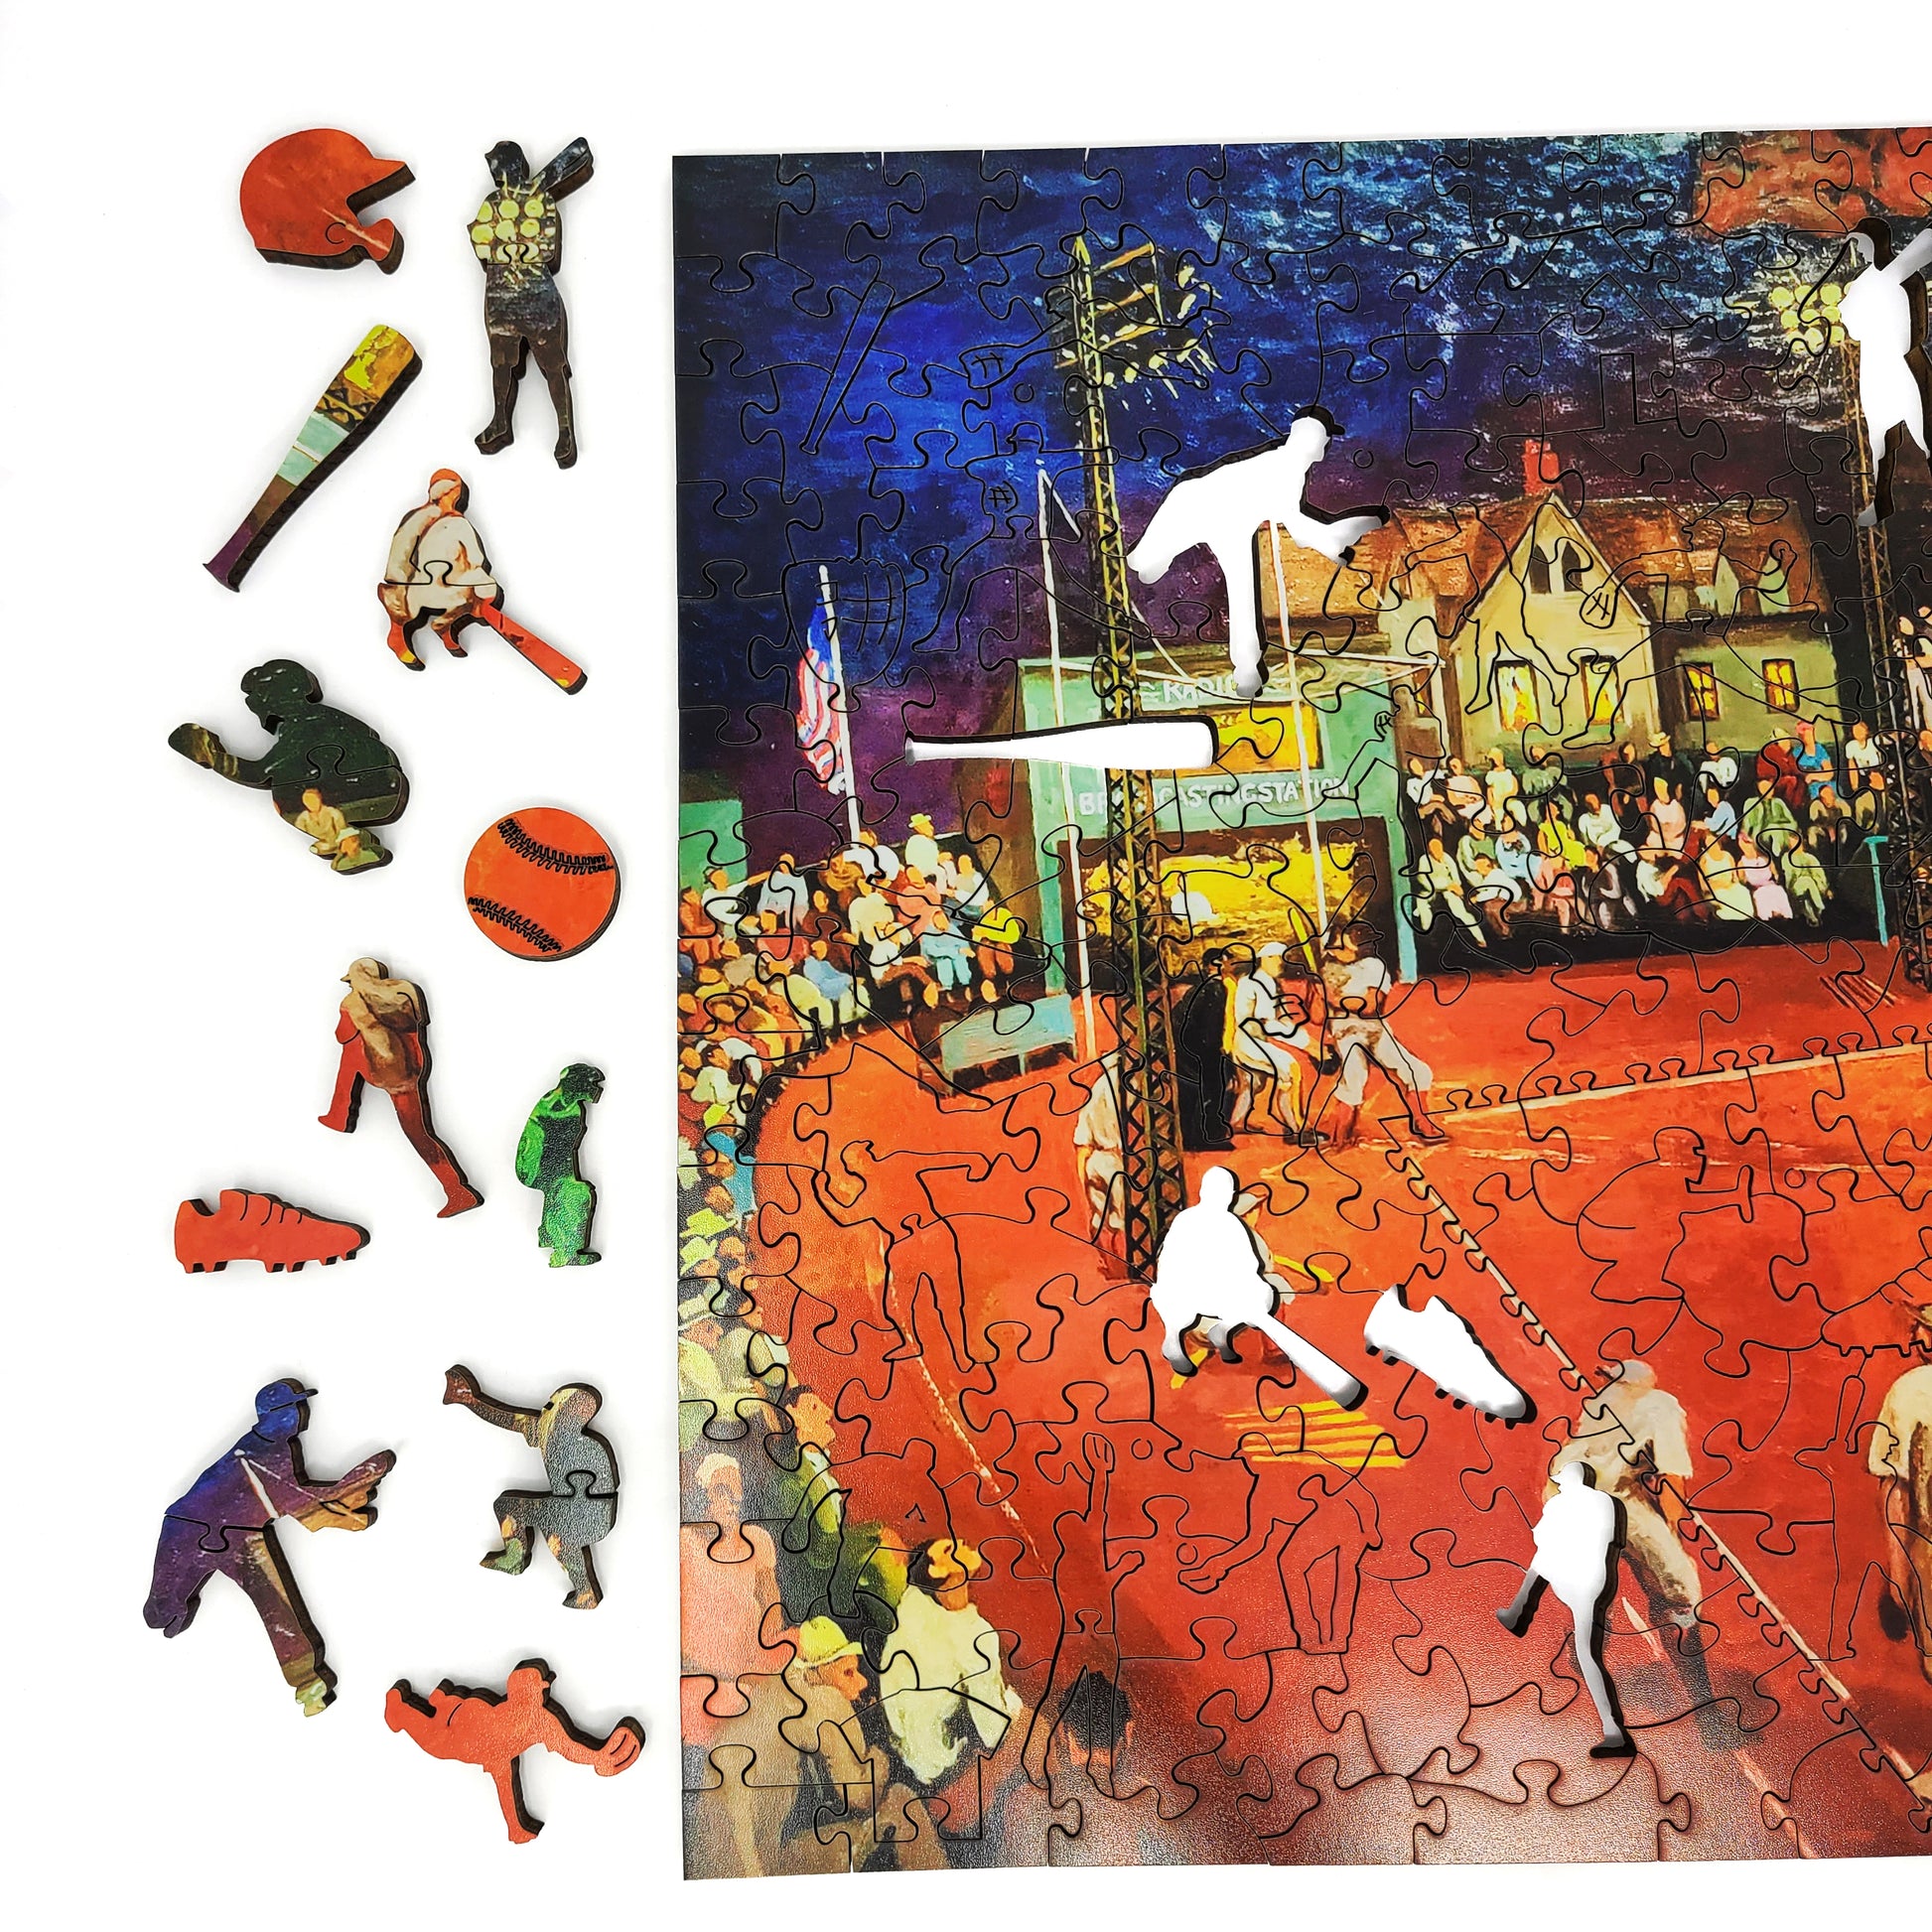 Wooden Jigsaw Puzzle for Adults with Uniquely Shaped Whimsical Pieces, made of thick 1/4 inch wood.